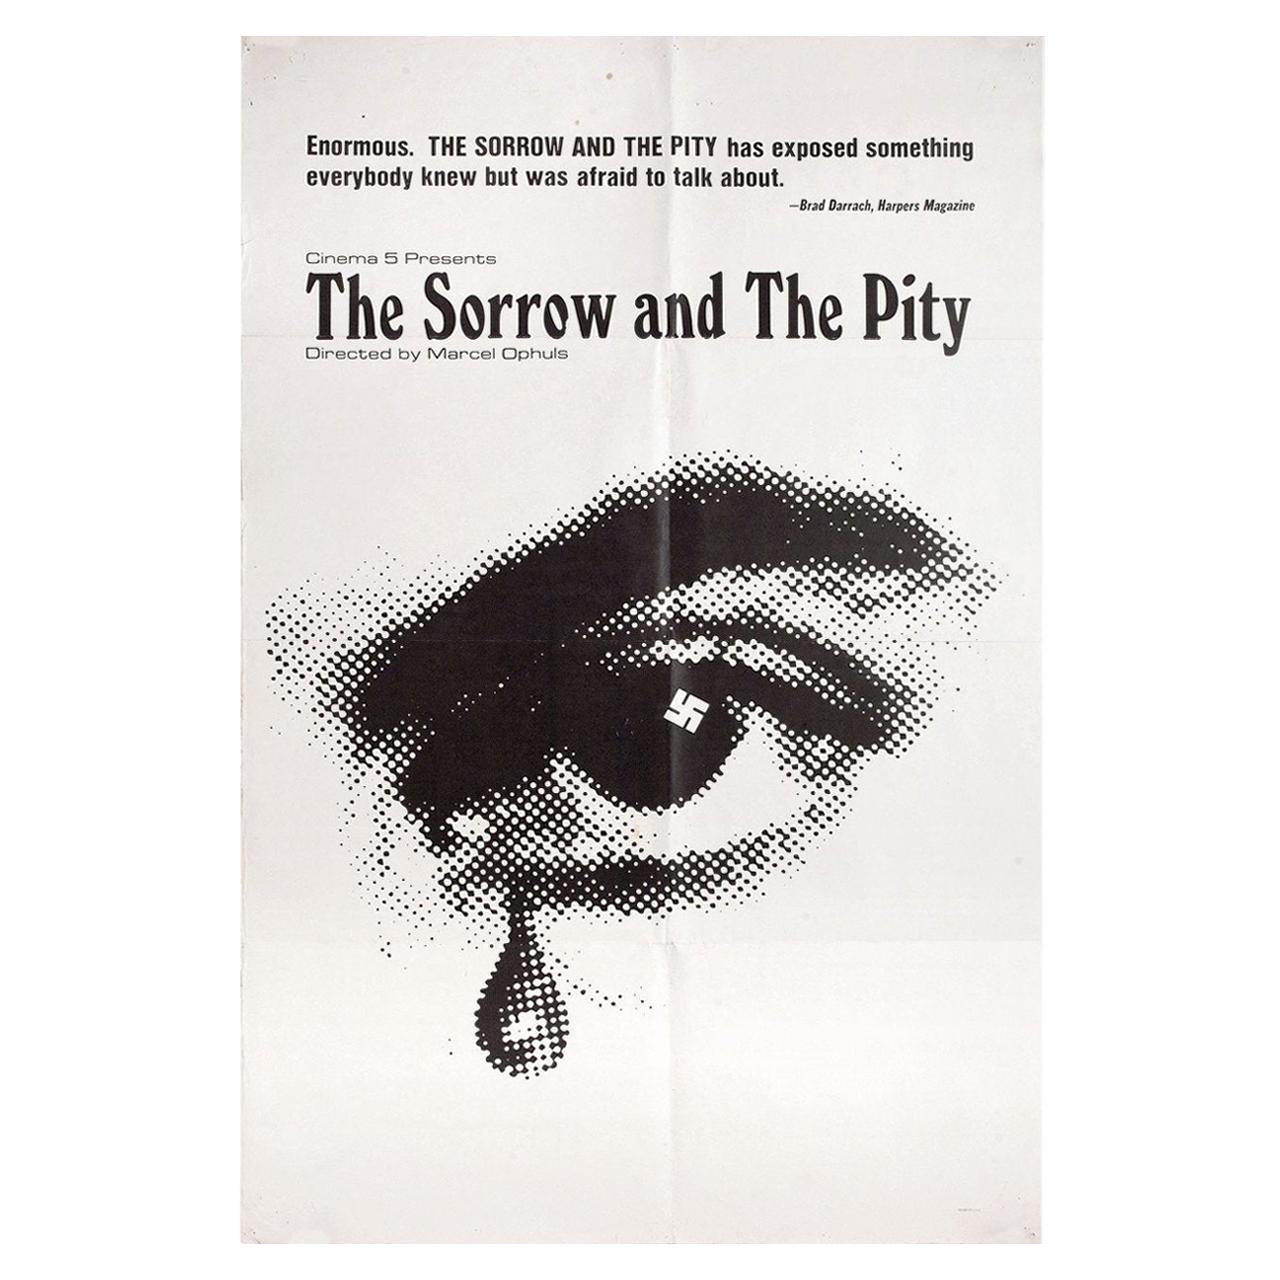 "The Sorrow and the Pity" 1971 U.S. One Sheet Film Poster